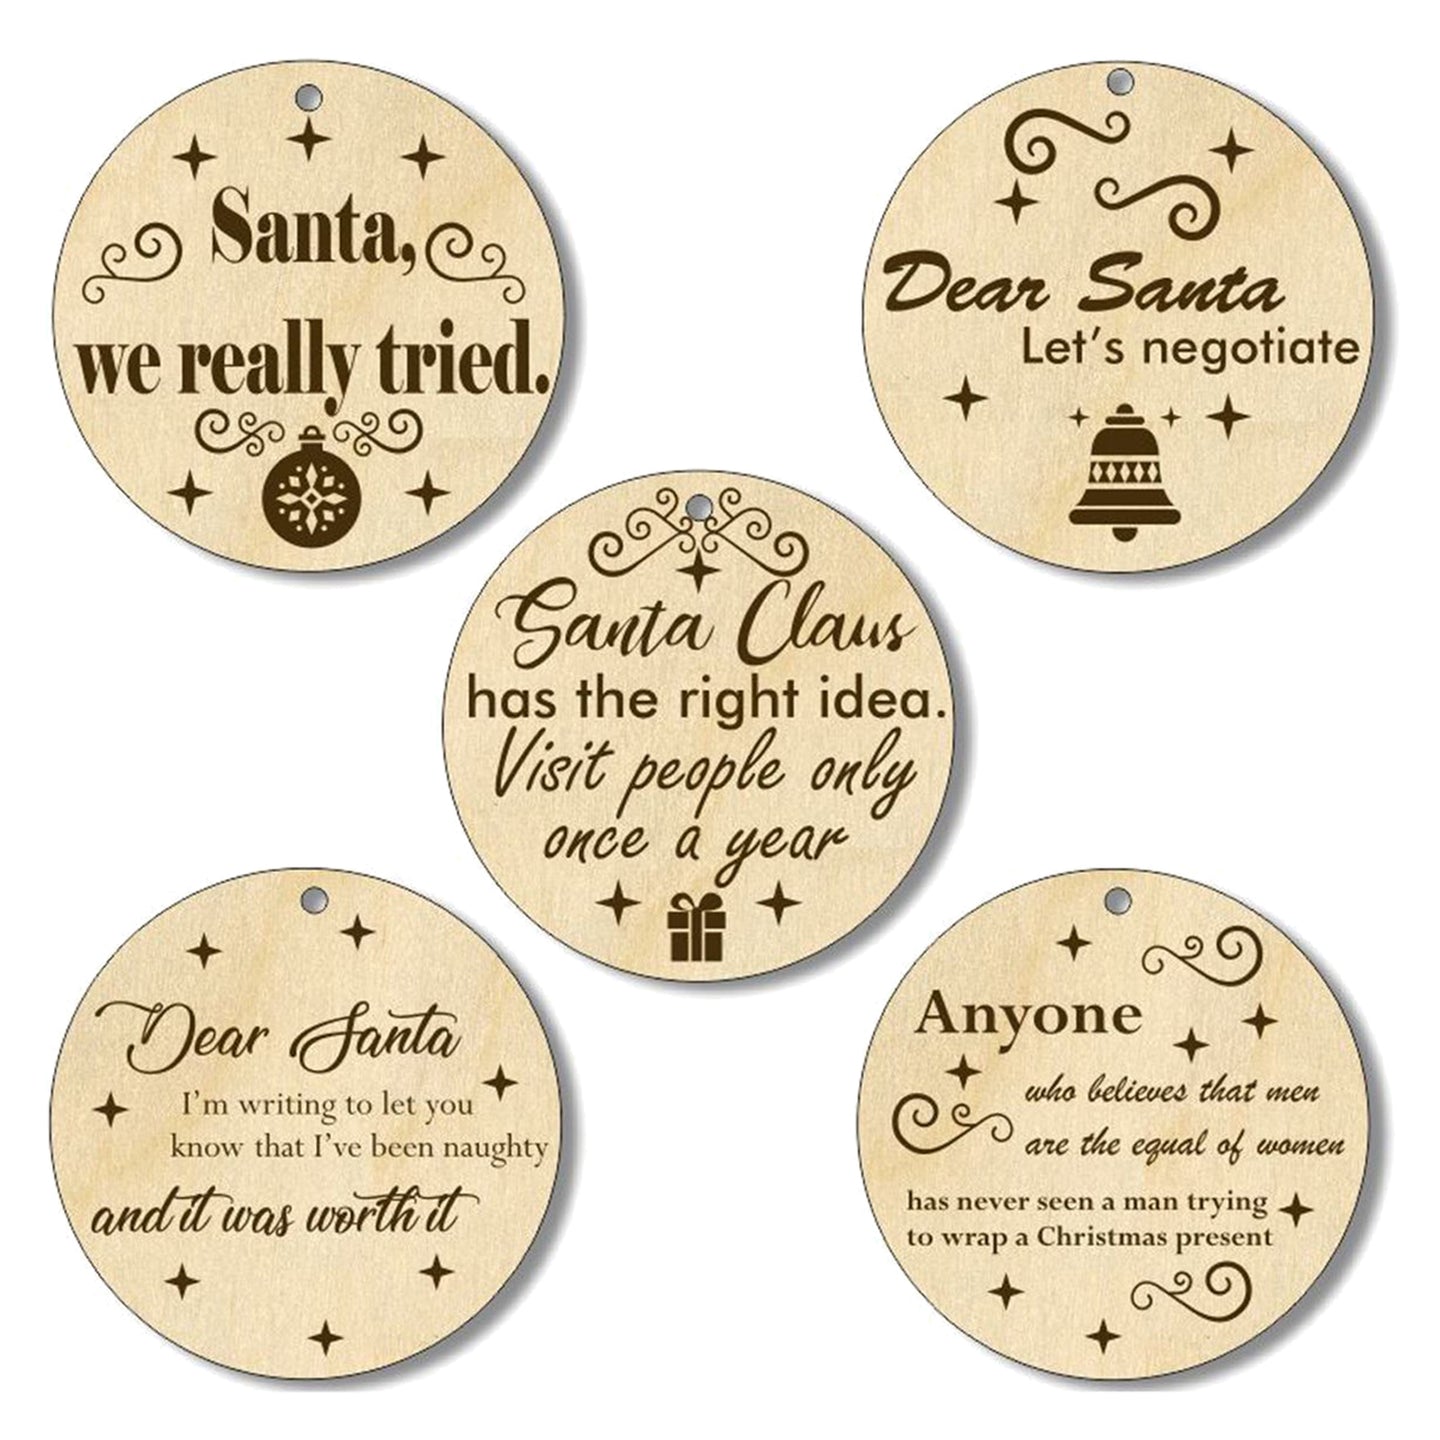 Christmas toys with quotes